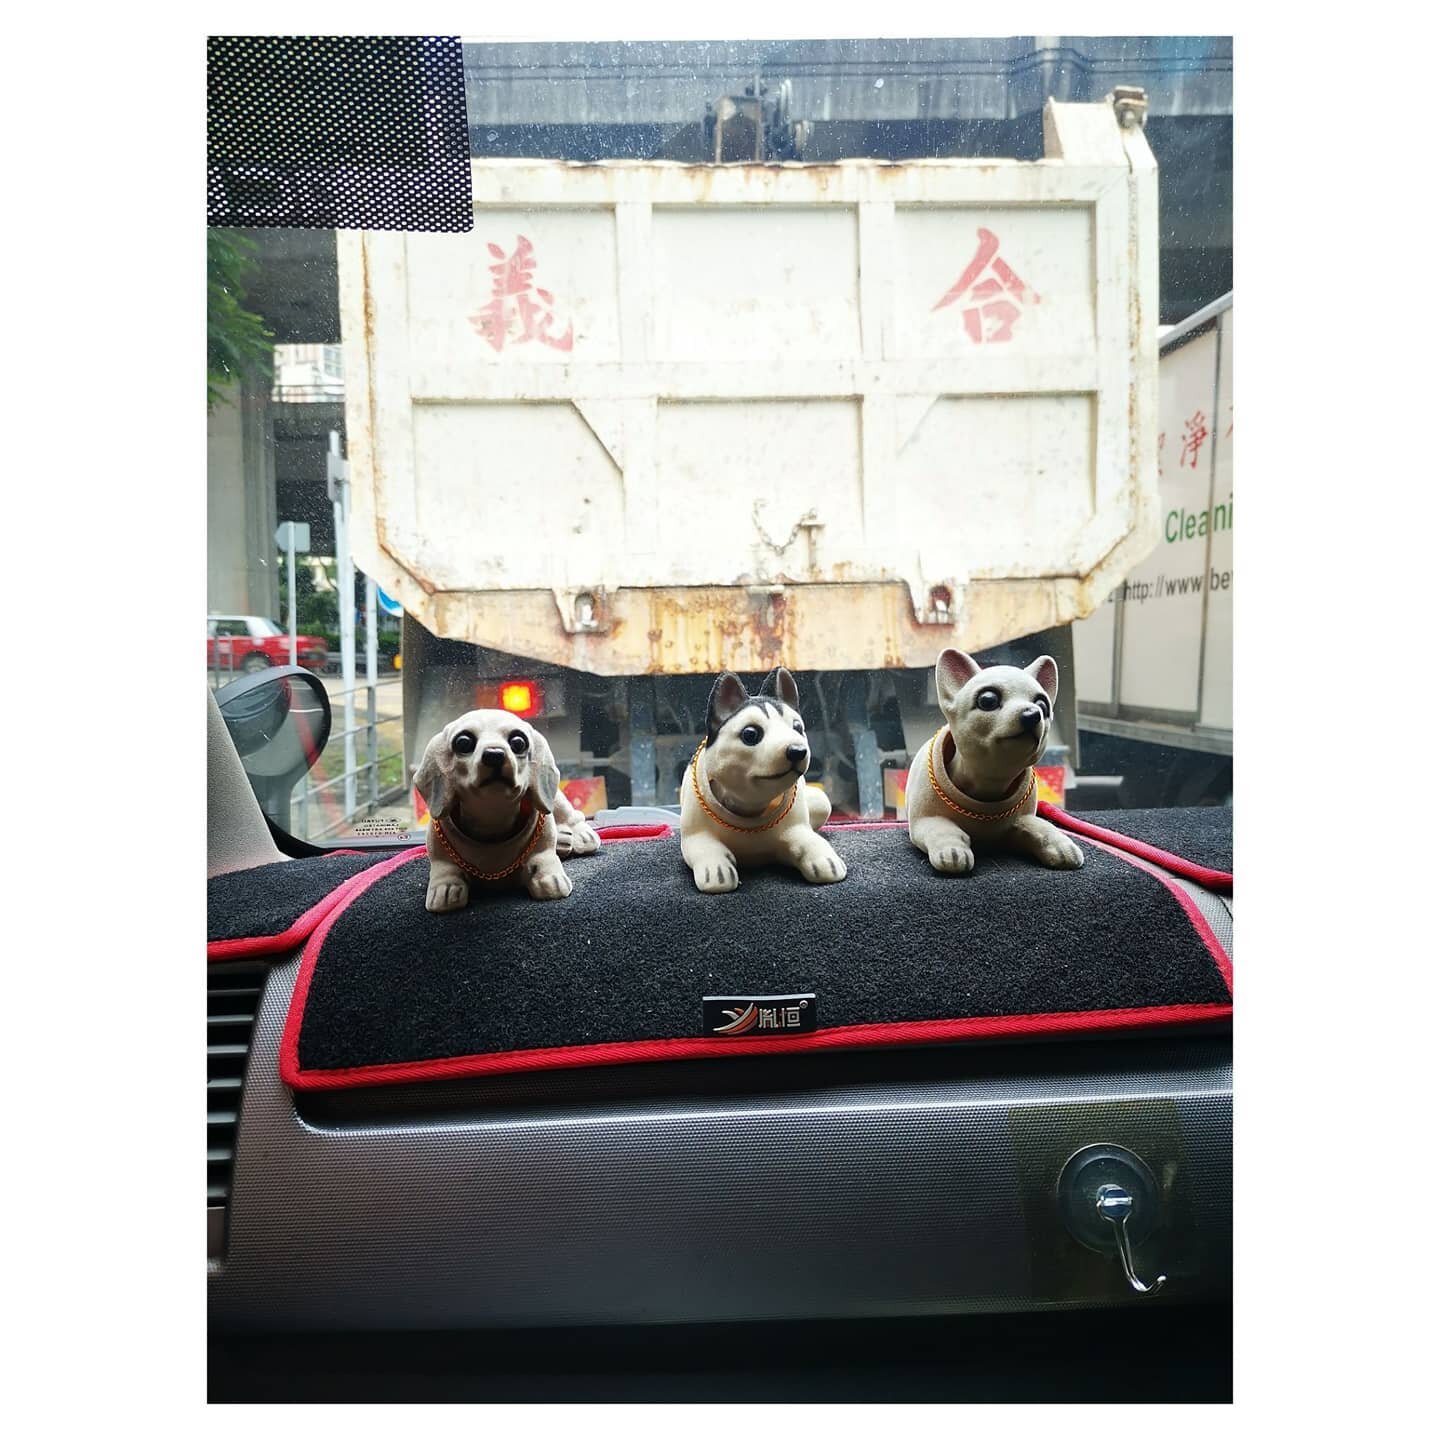 🚕🚕🚕🤔🤔🤔🤣🤣🤣 The #dashboard on #Yesterday's ride to work. They were #nodding the whole time. I don't think I #deserved that kind of #attention
.
.
.
#hkig #hkiger #onthewaytowork #rides #hongkong #callback #silent #applause #windows #frontseat 